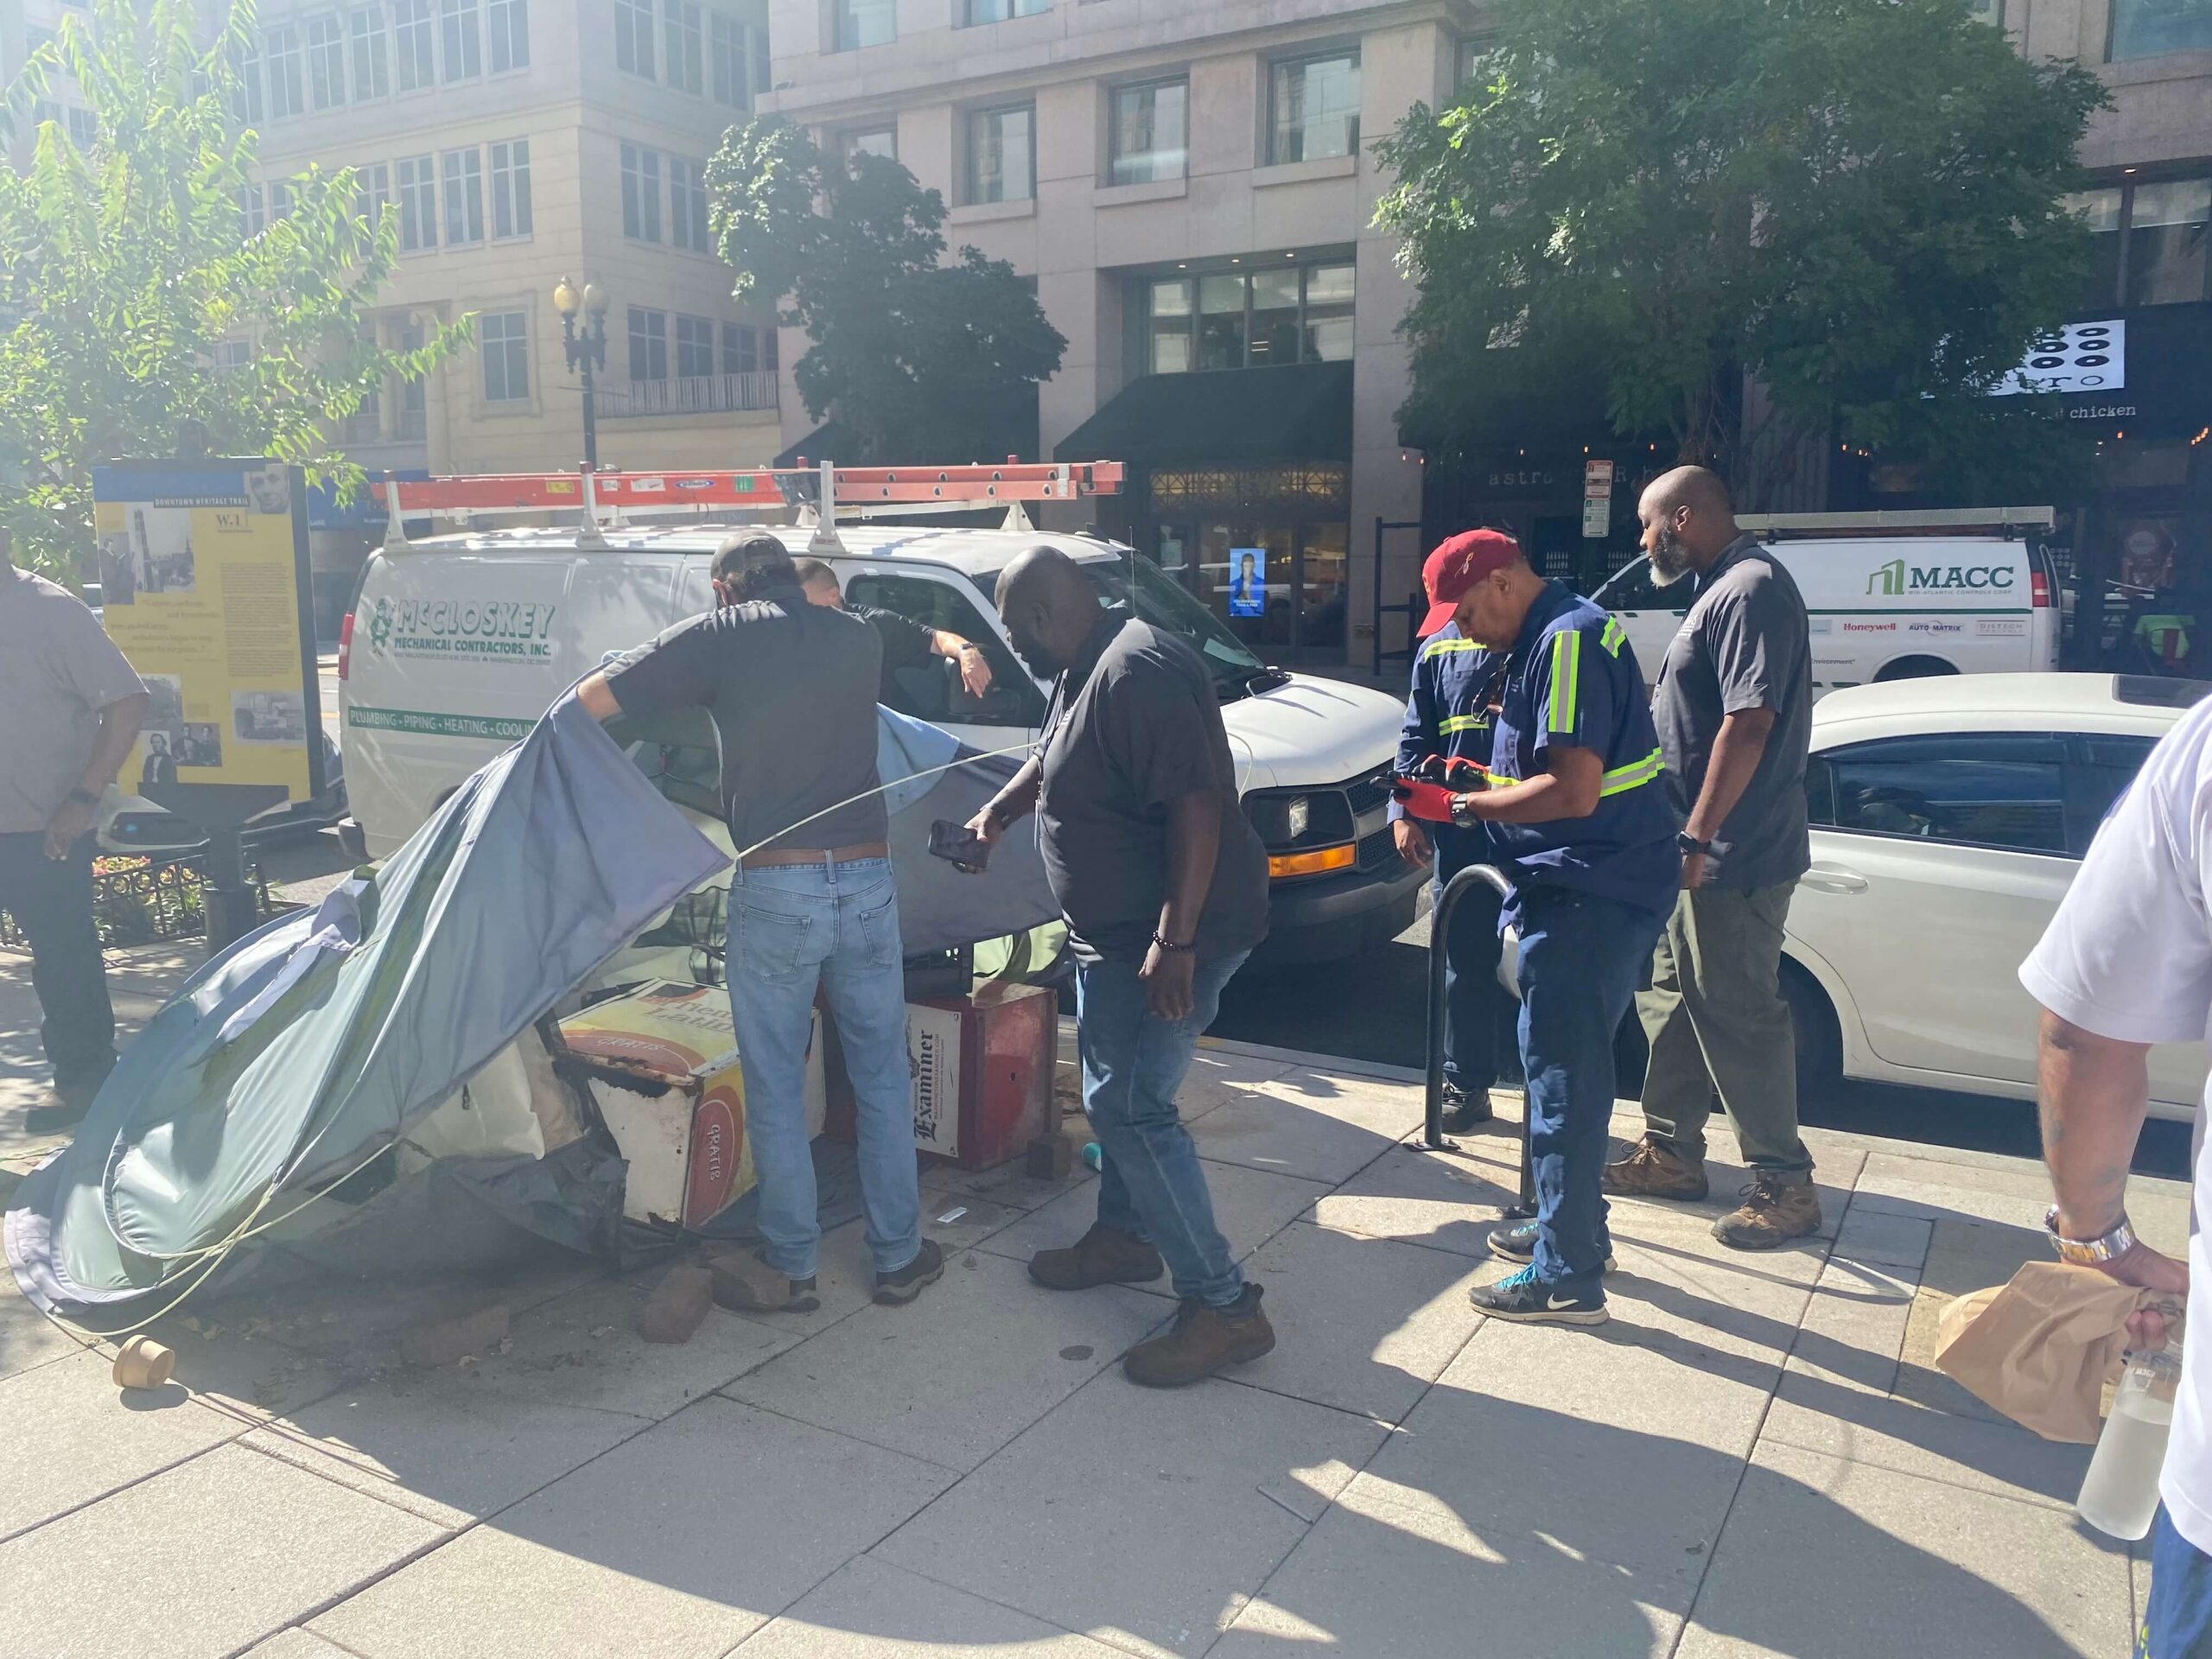 Four men watch as a DMHHS worker takes apart a grey tent. 